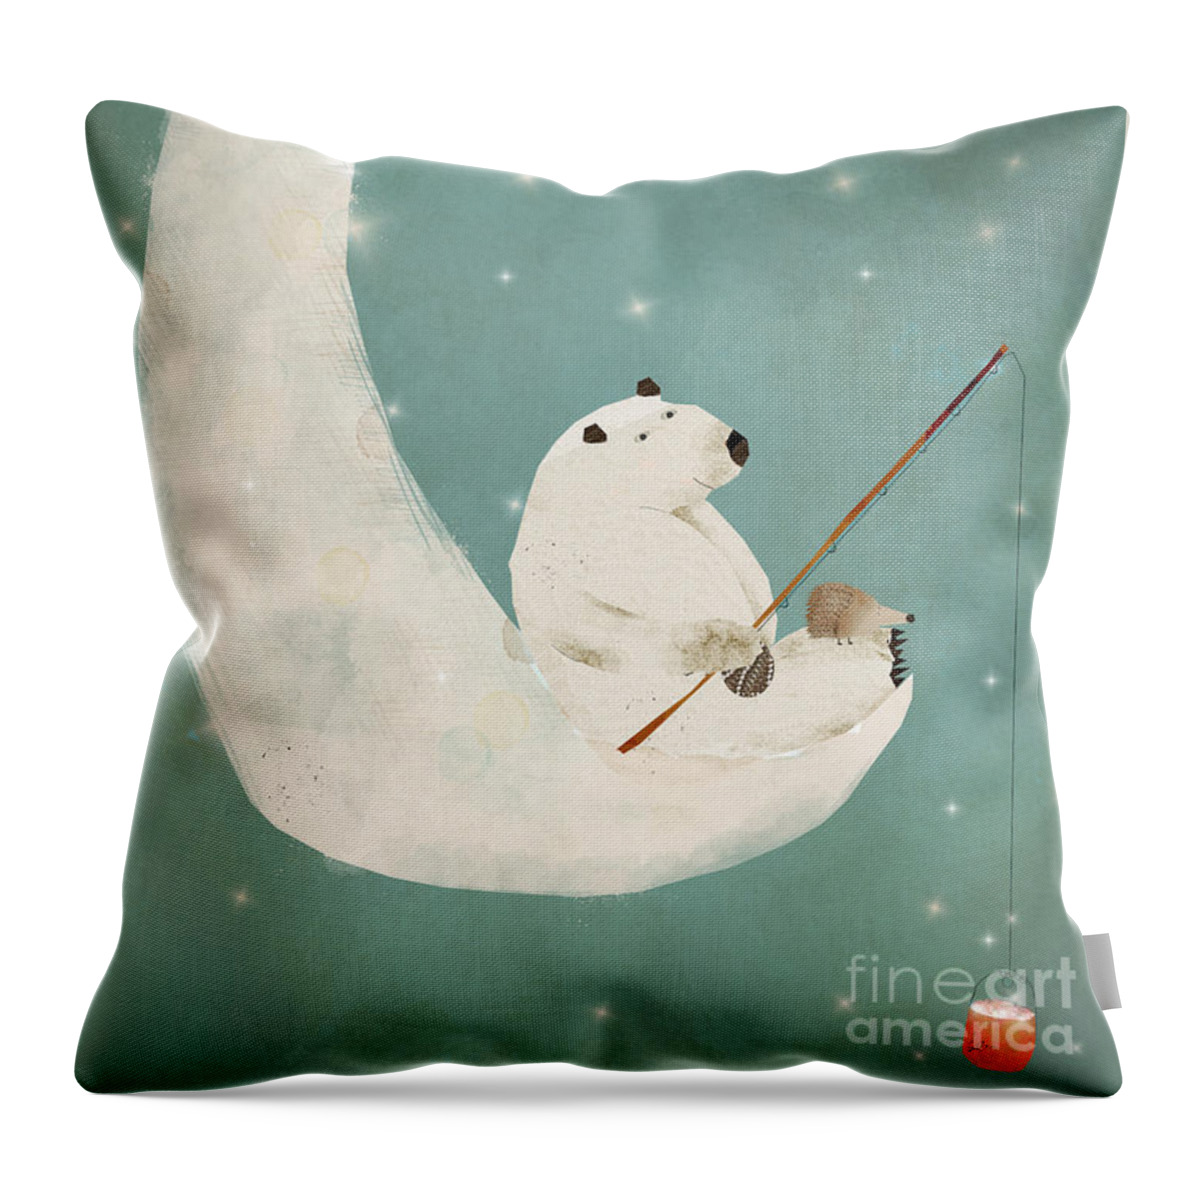 Bears Throw Pillow featuring the painting Catch A Falling Star by Bri Buckley